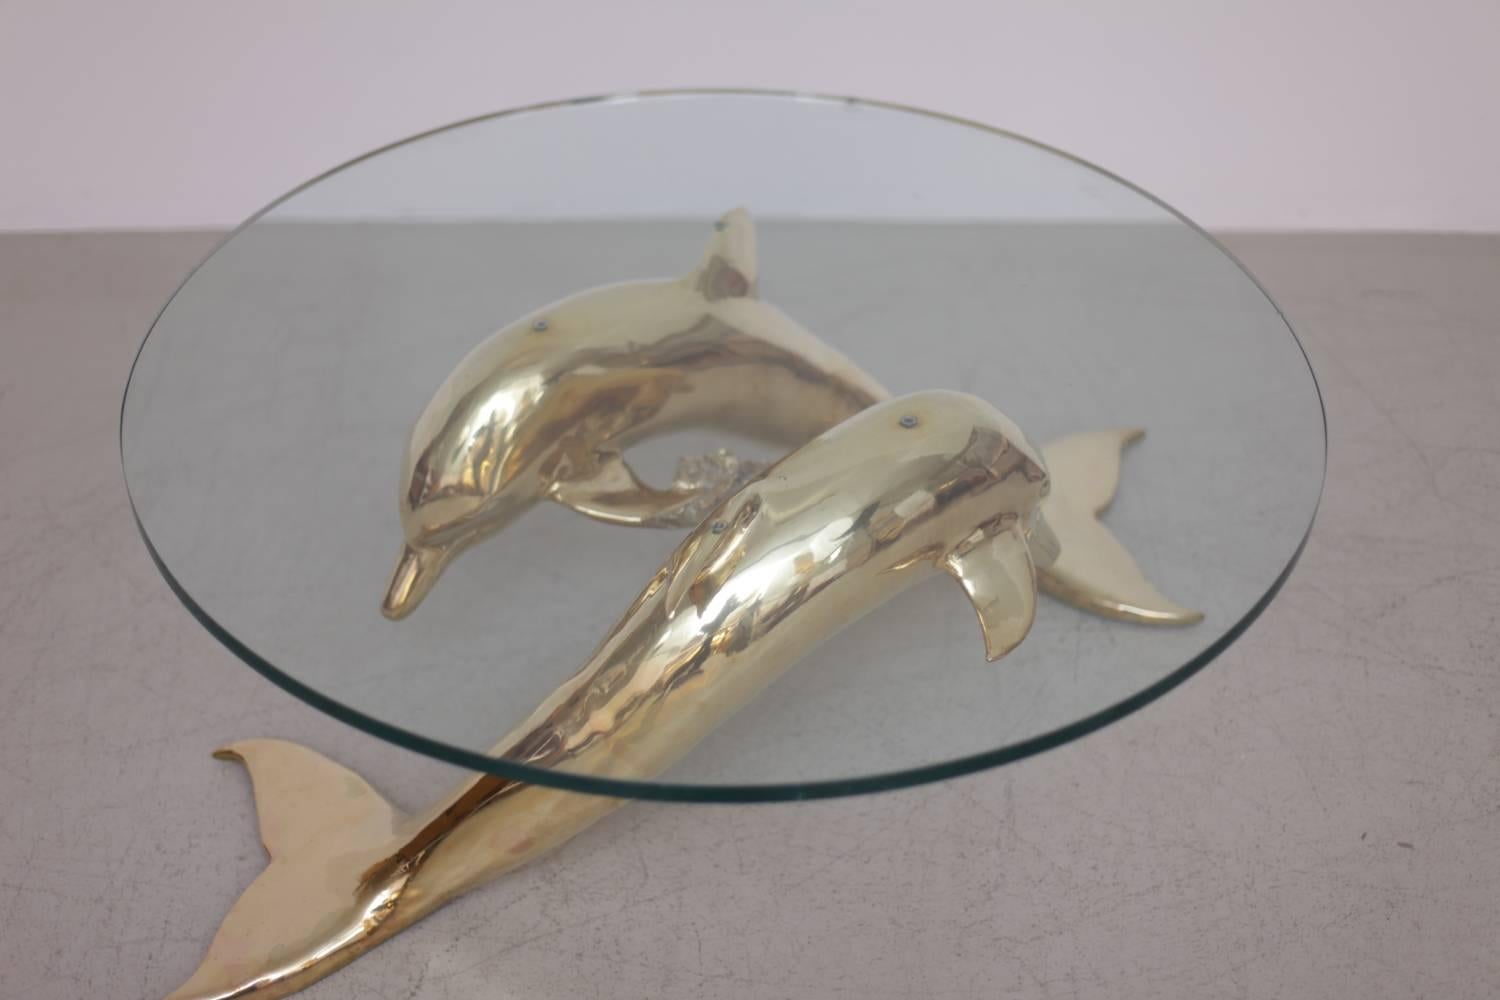 Very elegant and huge coffee table in brass and glass. The glass table top is holded by two brass dolphins. The table is a really eyecatcher. The glass top is chipped. The brass is in excellent condition.

